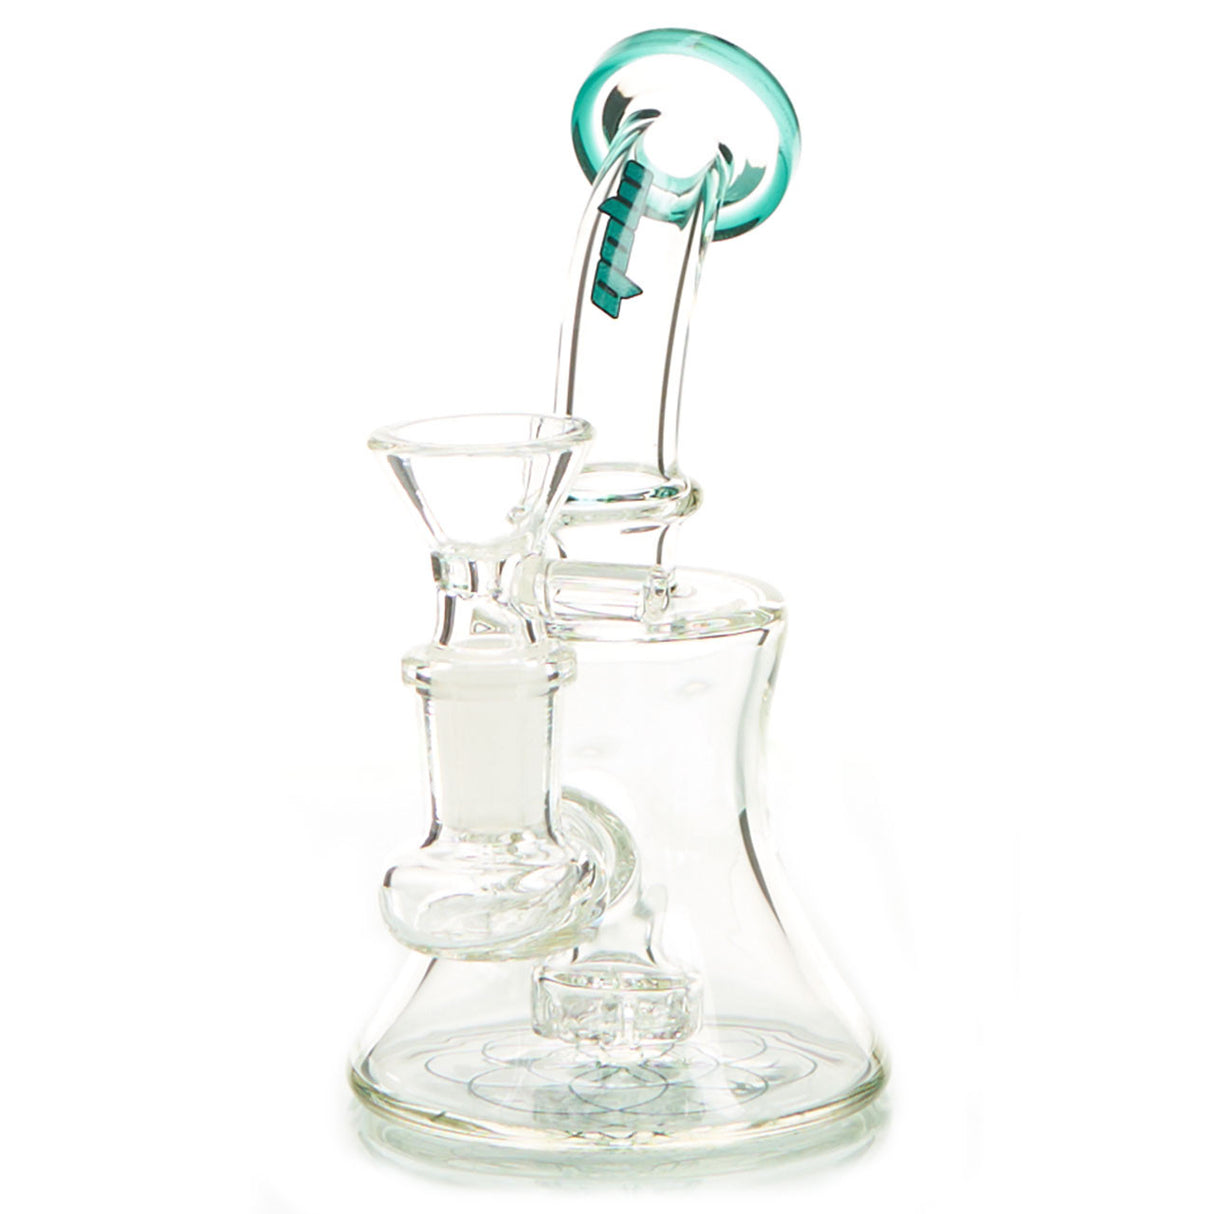 MOB Glass Joelle Banger Hanger Concentrate Dab Rig with Showerhead Perc in a variety of colors